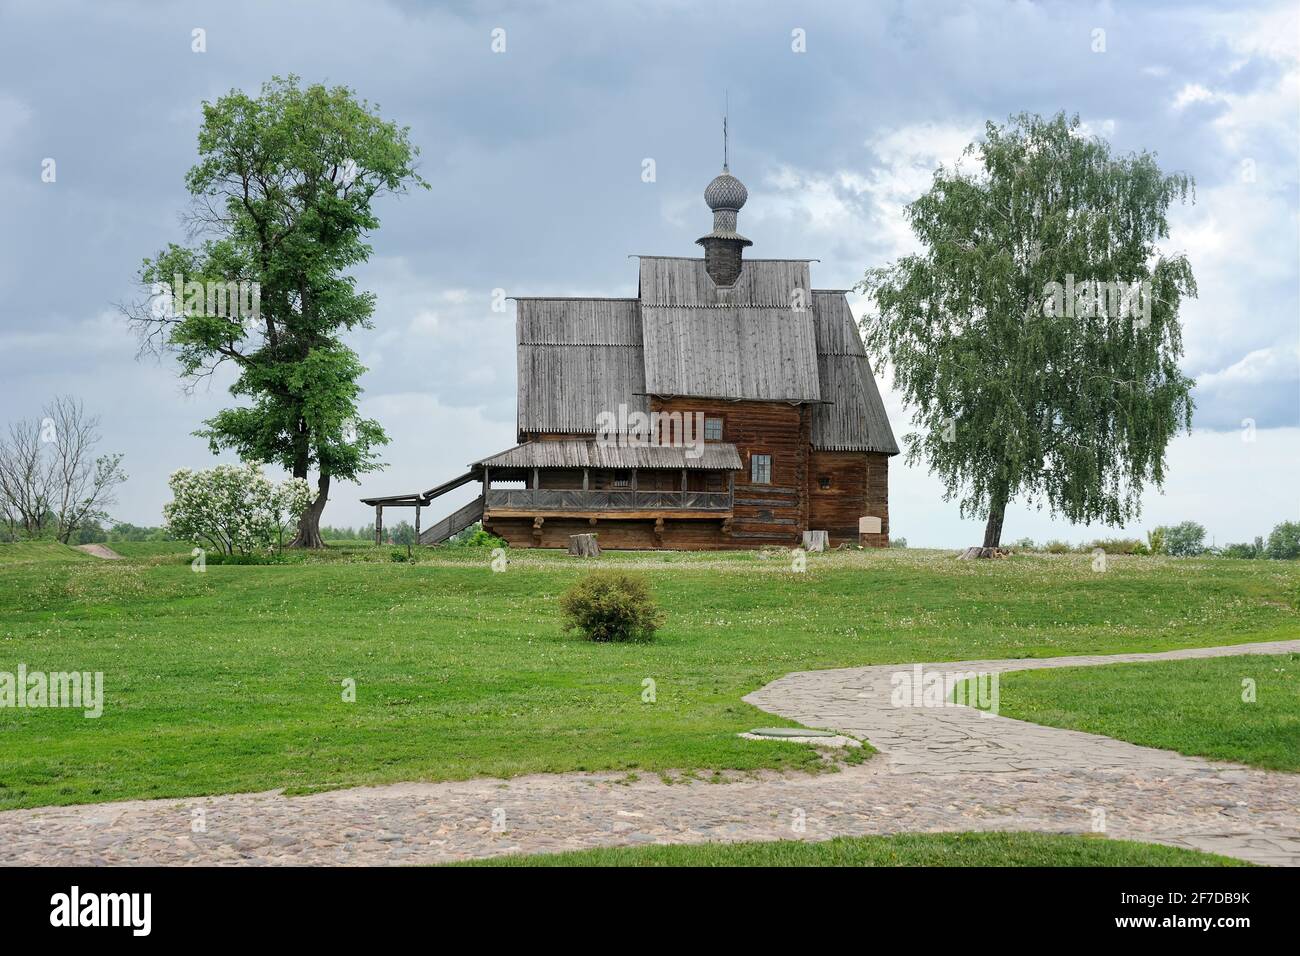 = Wooden Church Framed by Trees Under Gray Clouds =  Old wooden church of St. Nicholas on the grounds of Suzdal’s Kremlin framed by trees under gray c Stock Photo